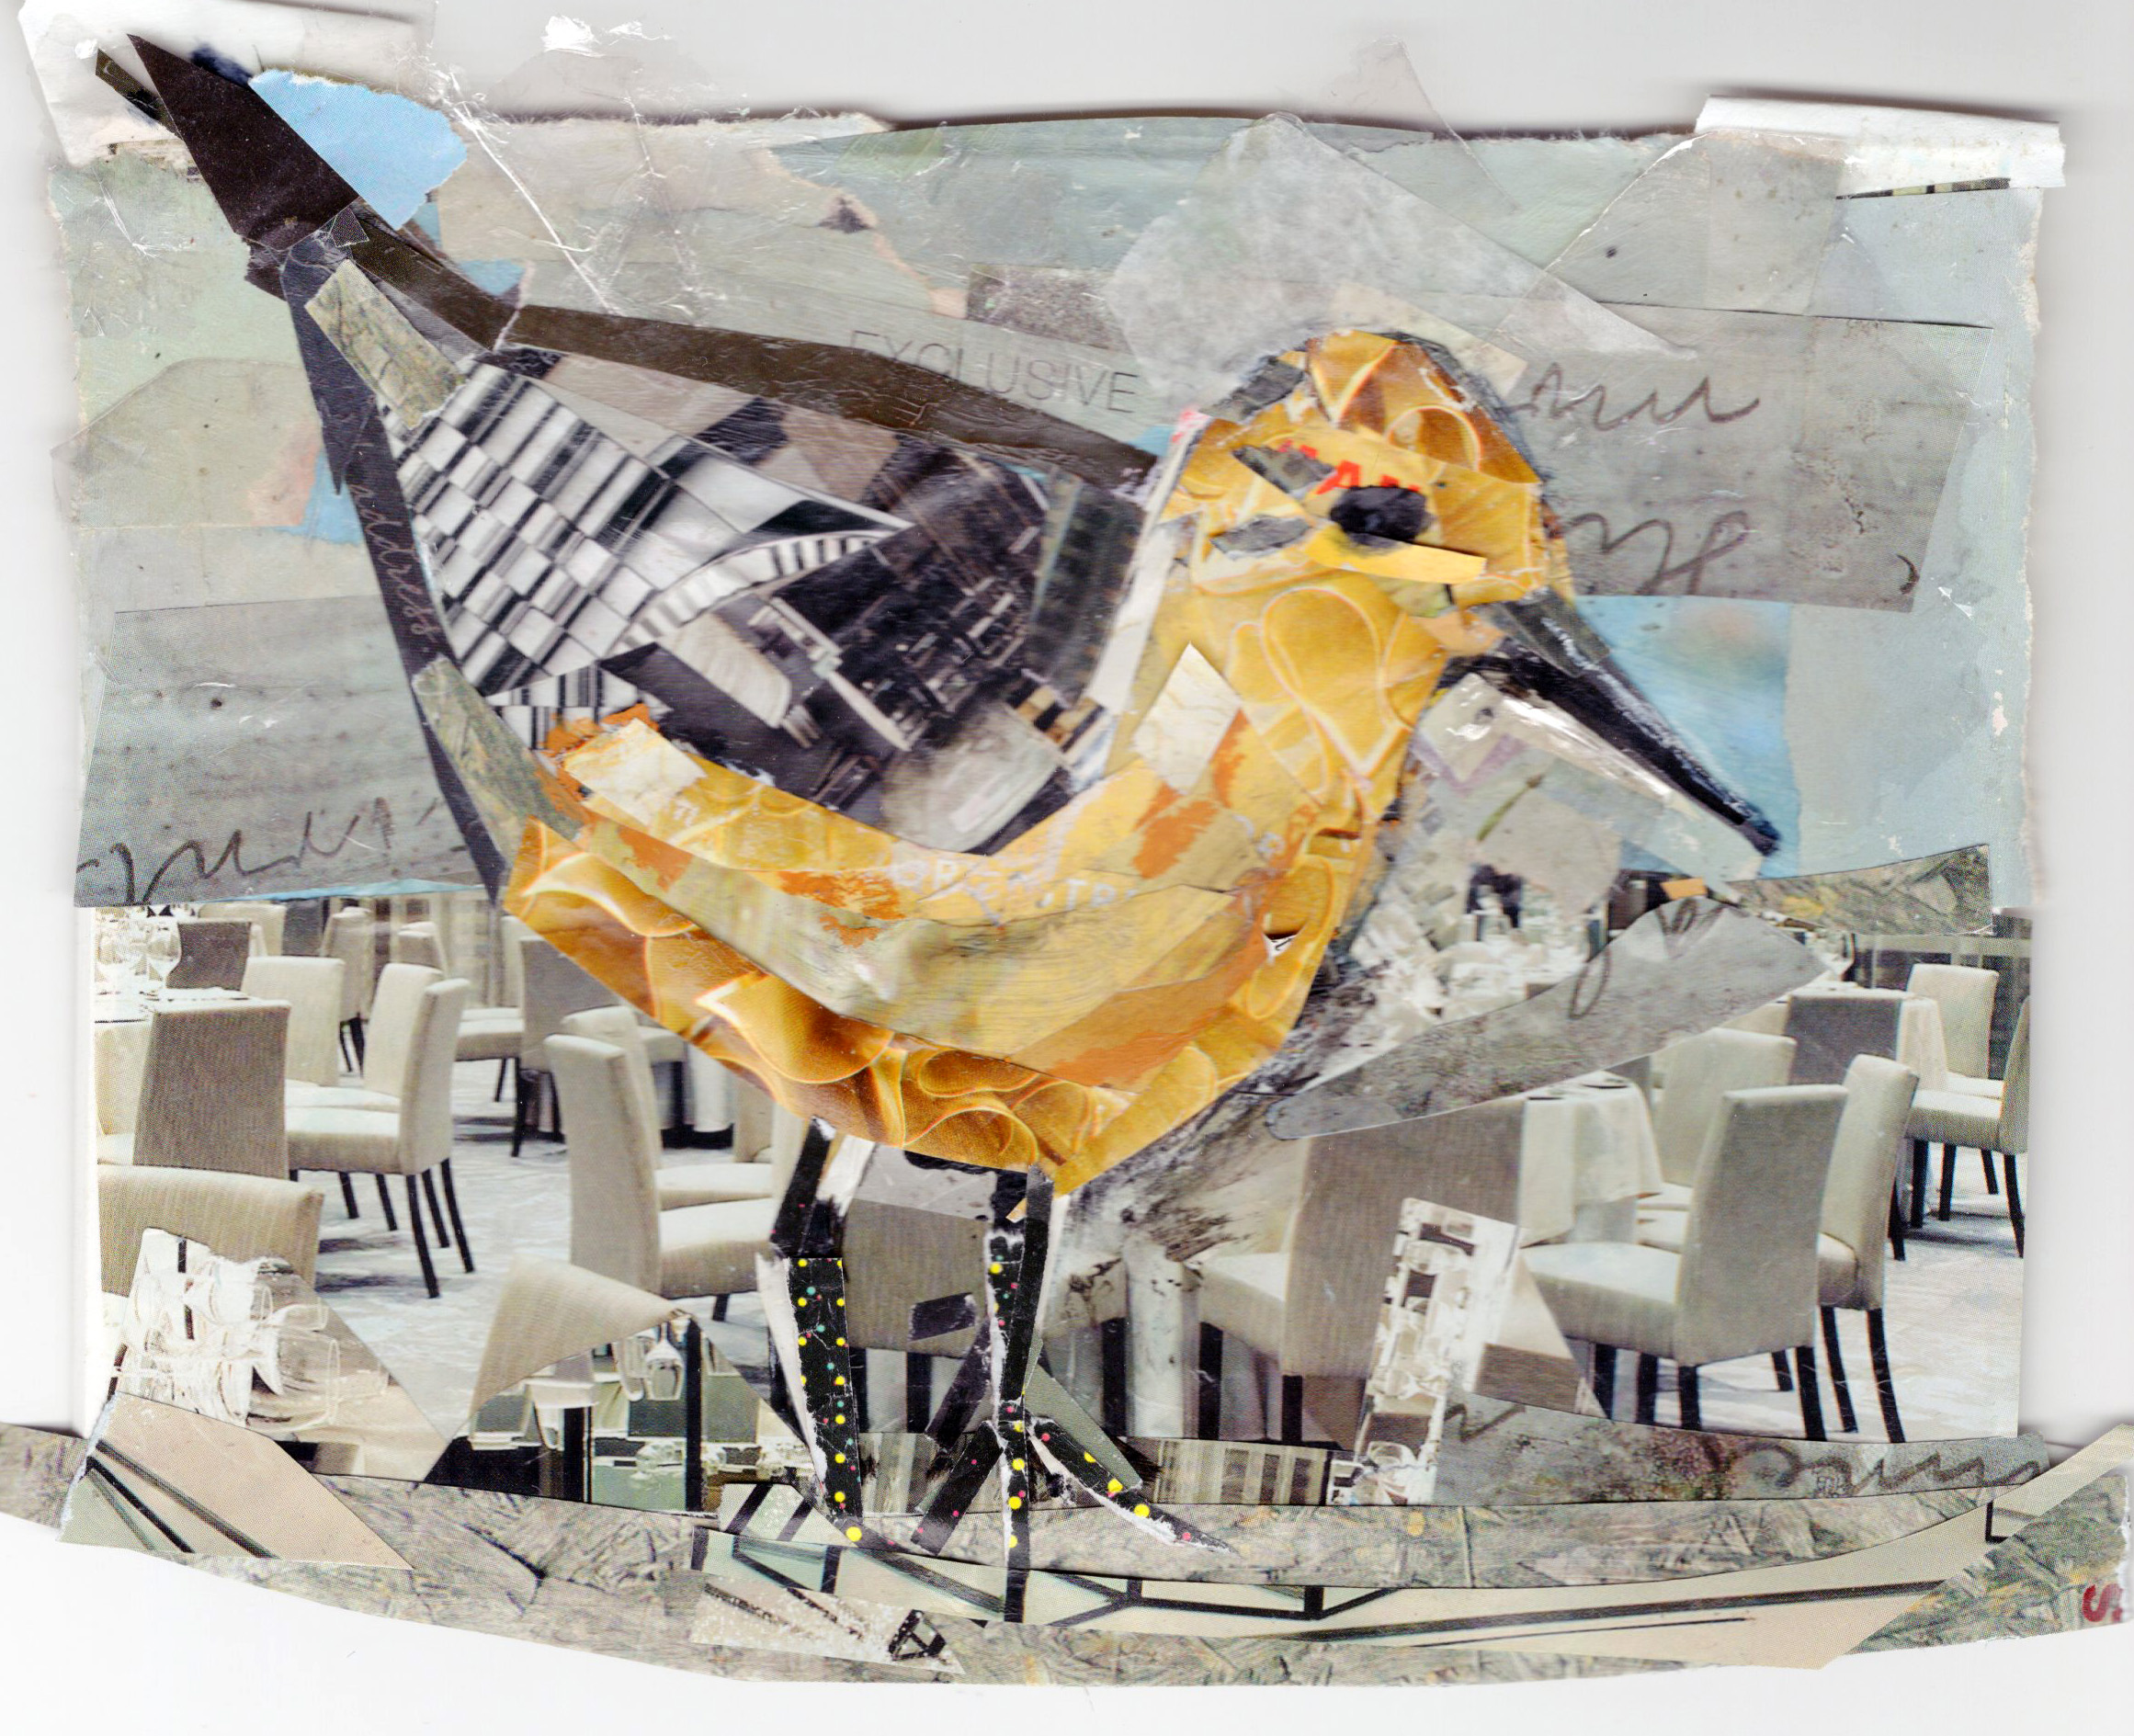 Red Knot by Kathryn DeMarco, collage, 9 x 11 at Craven Allen Gallery